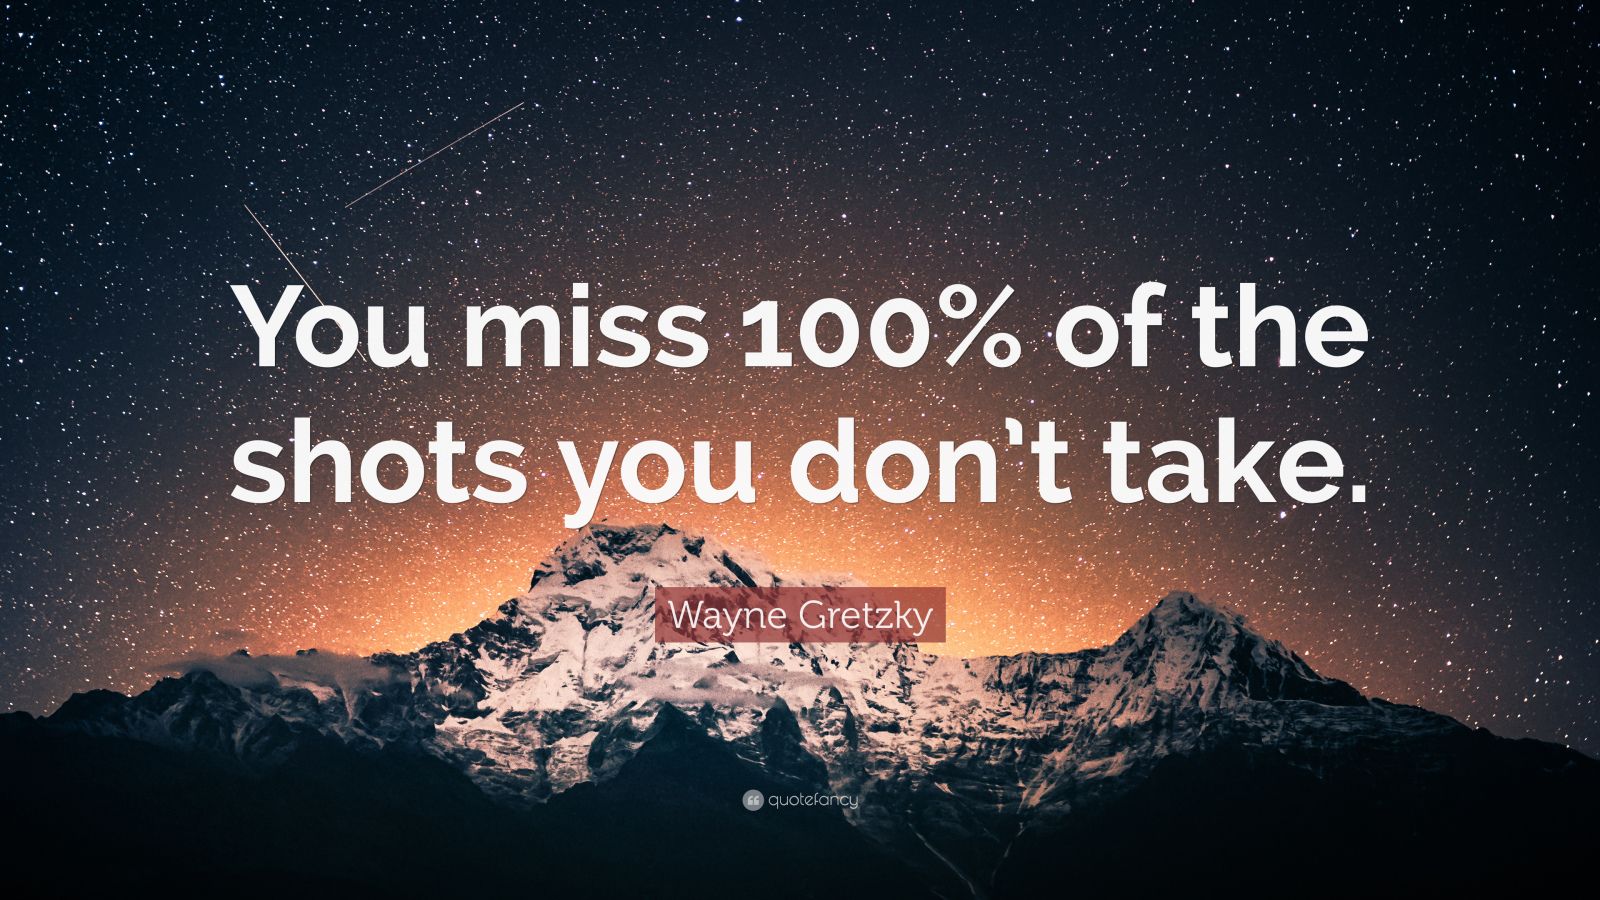 Wayne Gretzky Quote: “You miss 100% of the shots you don’t take.” (20